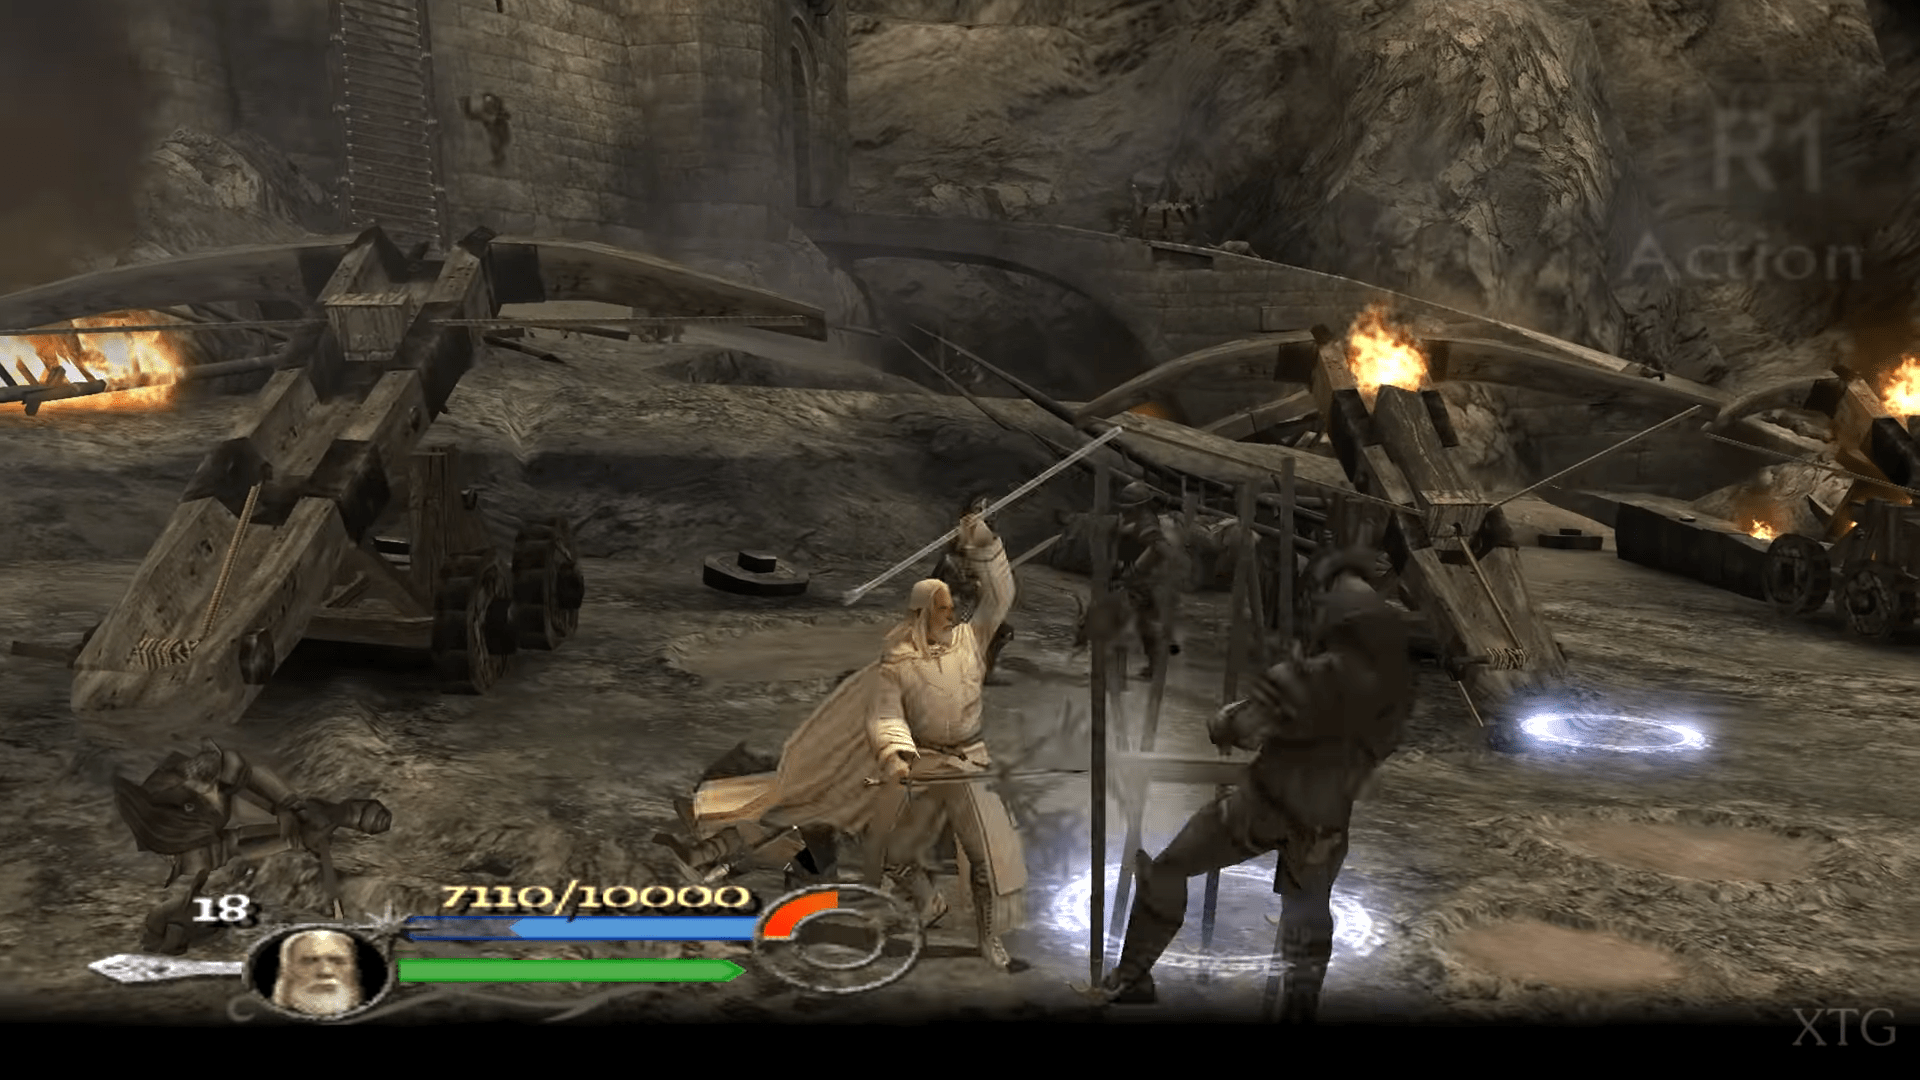 Huérfano destacar Psicológico The Lord of the Rings: The Return of the King (Europe) PS2 ISO - CDRomance